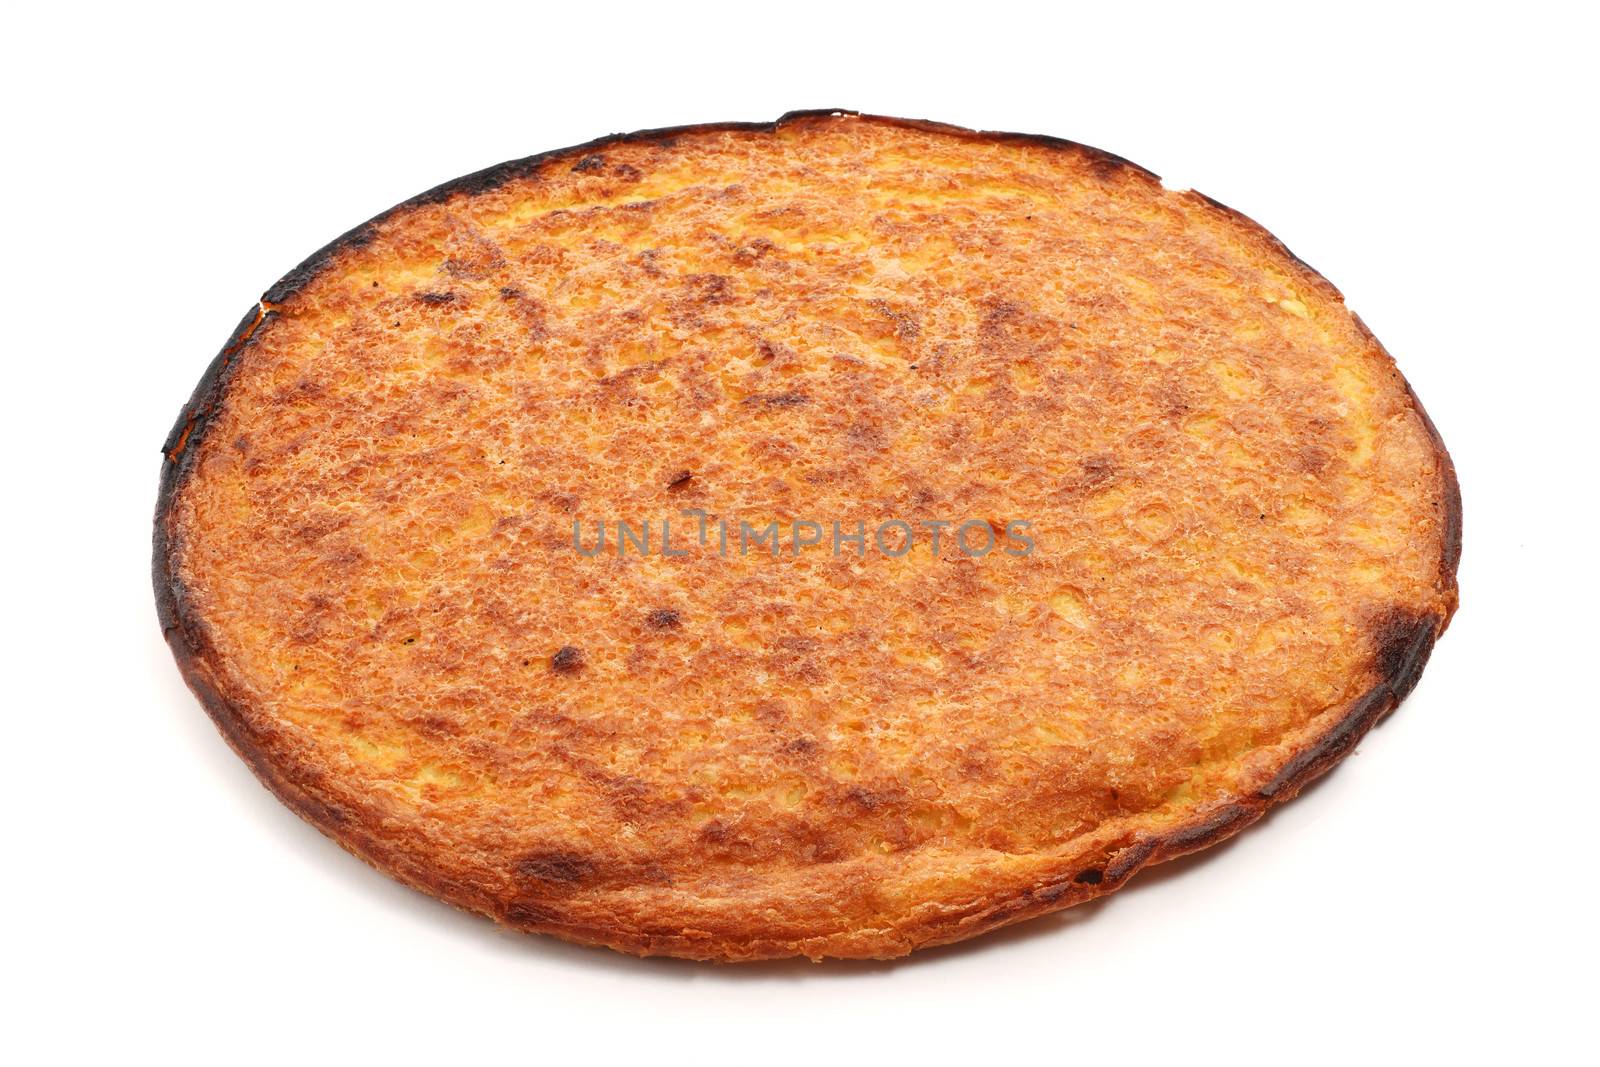 italian farinata baked with chickpea flour over white background